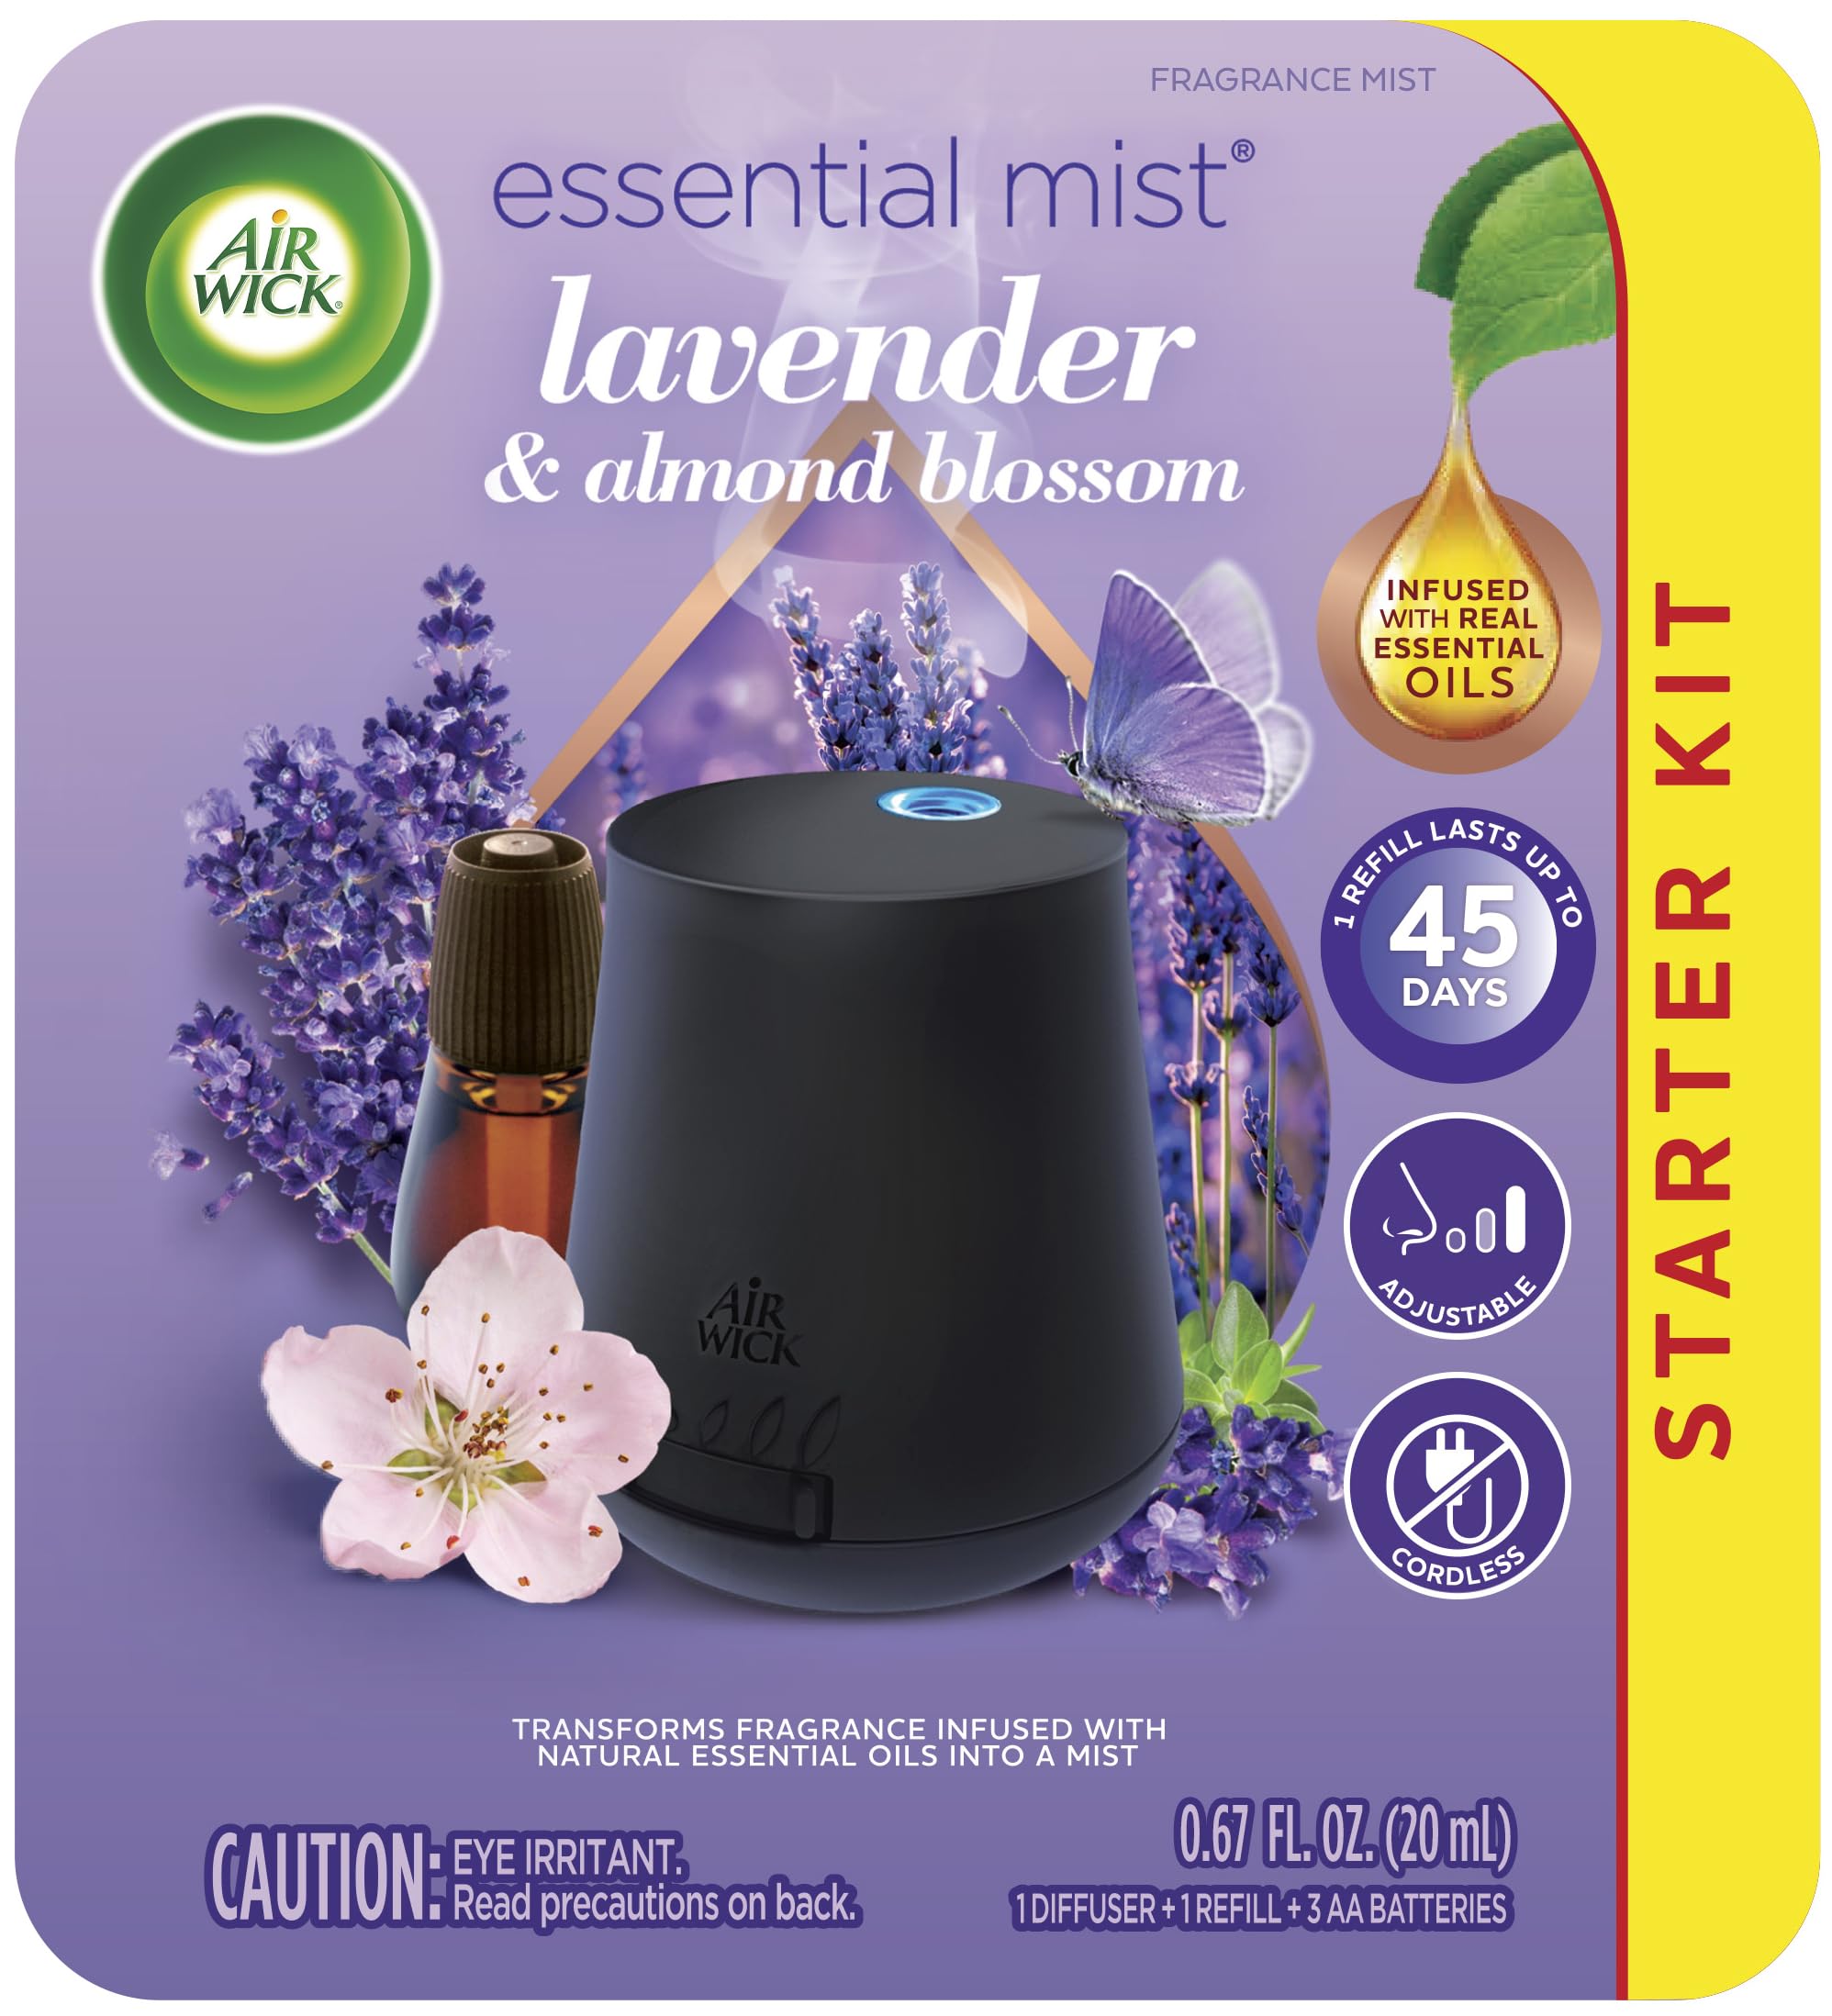 Walmart: FREE Air Wick Essential Mist Diffuser ($10 VALUE; JUST USE YOUR PHONE!)